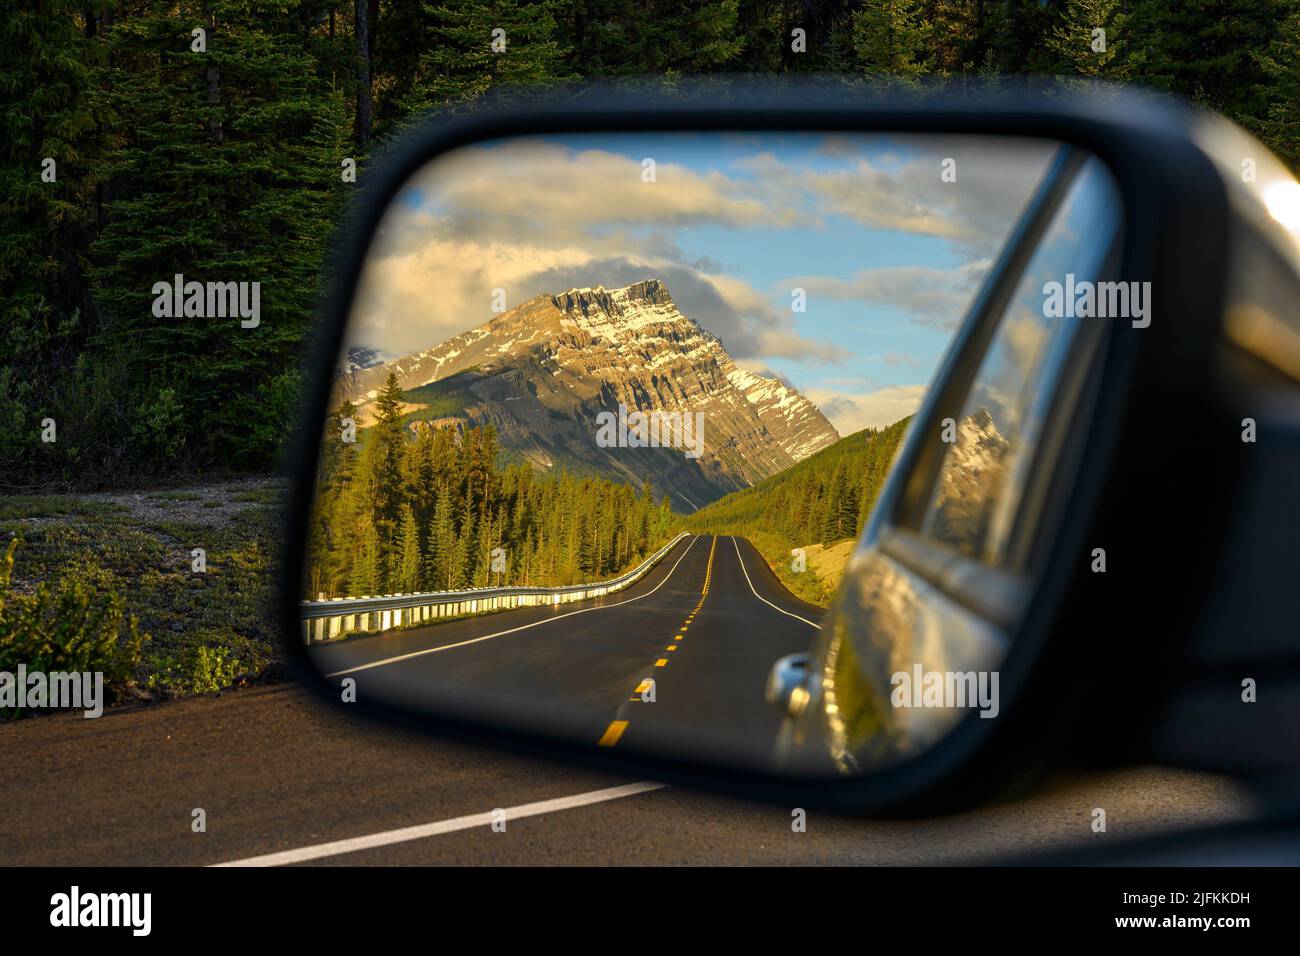 Driving a car through a mountain road that leads through the Canadian Rockies and watching the beautiful scenery in the rearview mirror in the Stock Photo